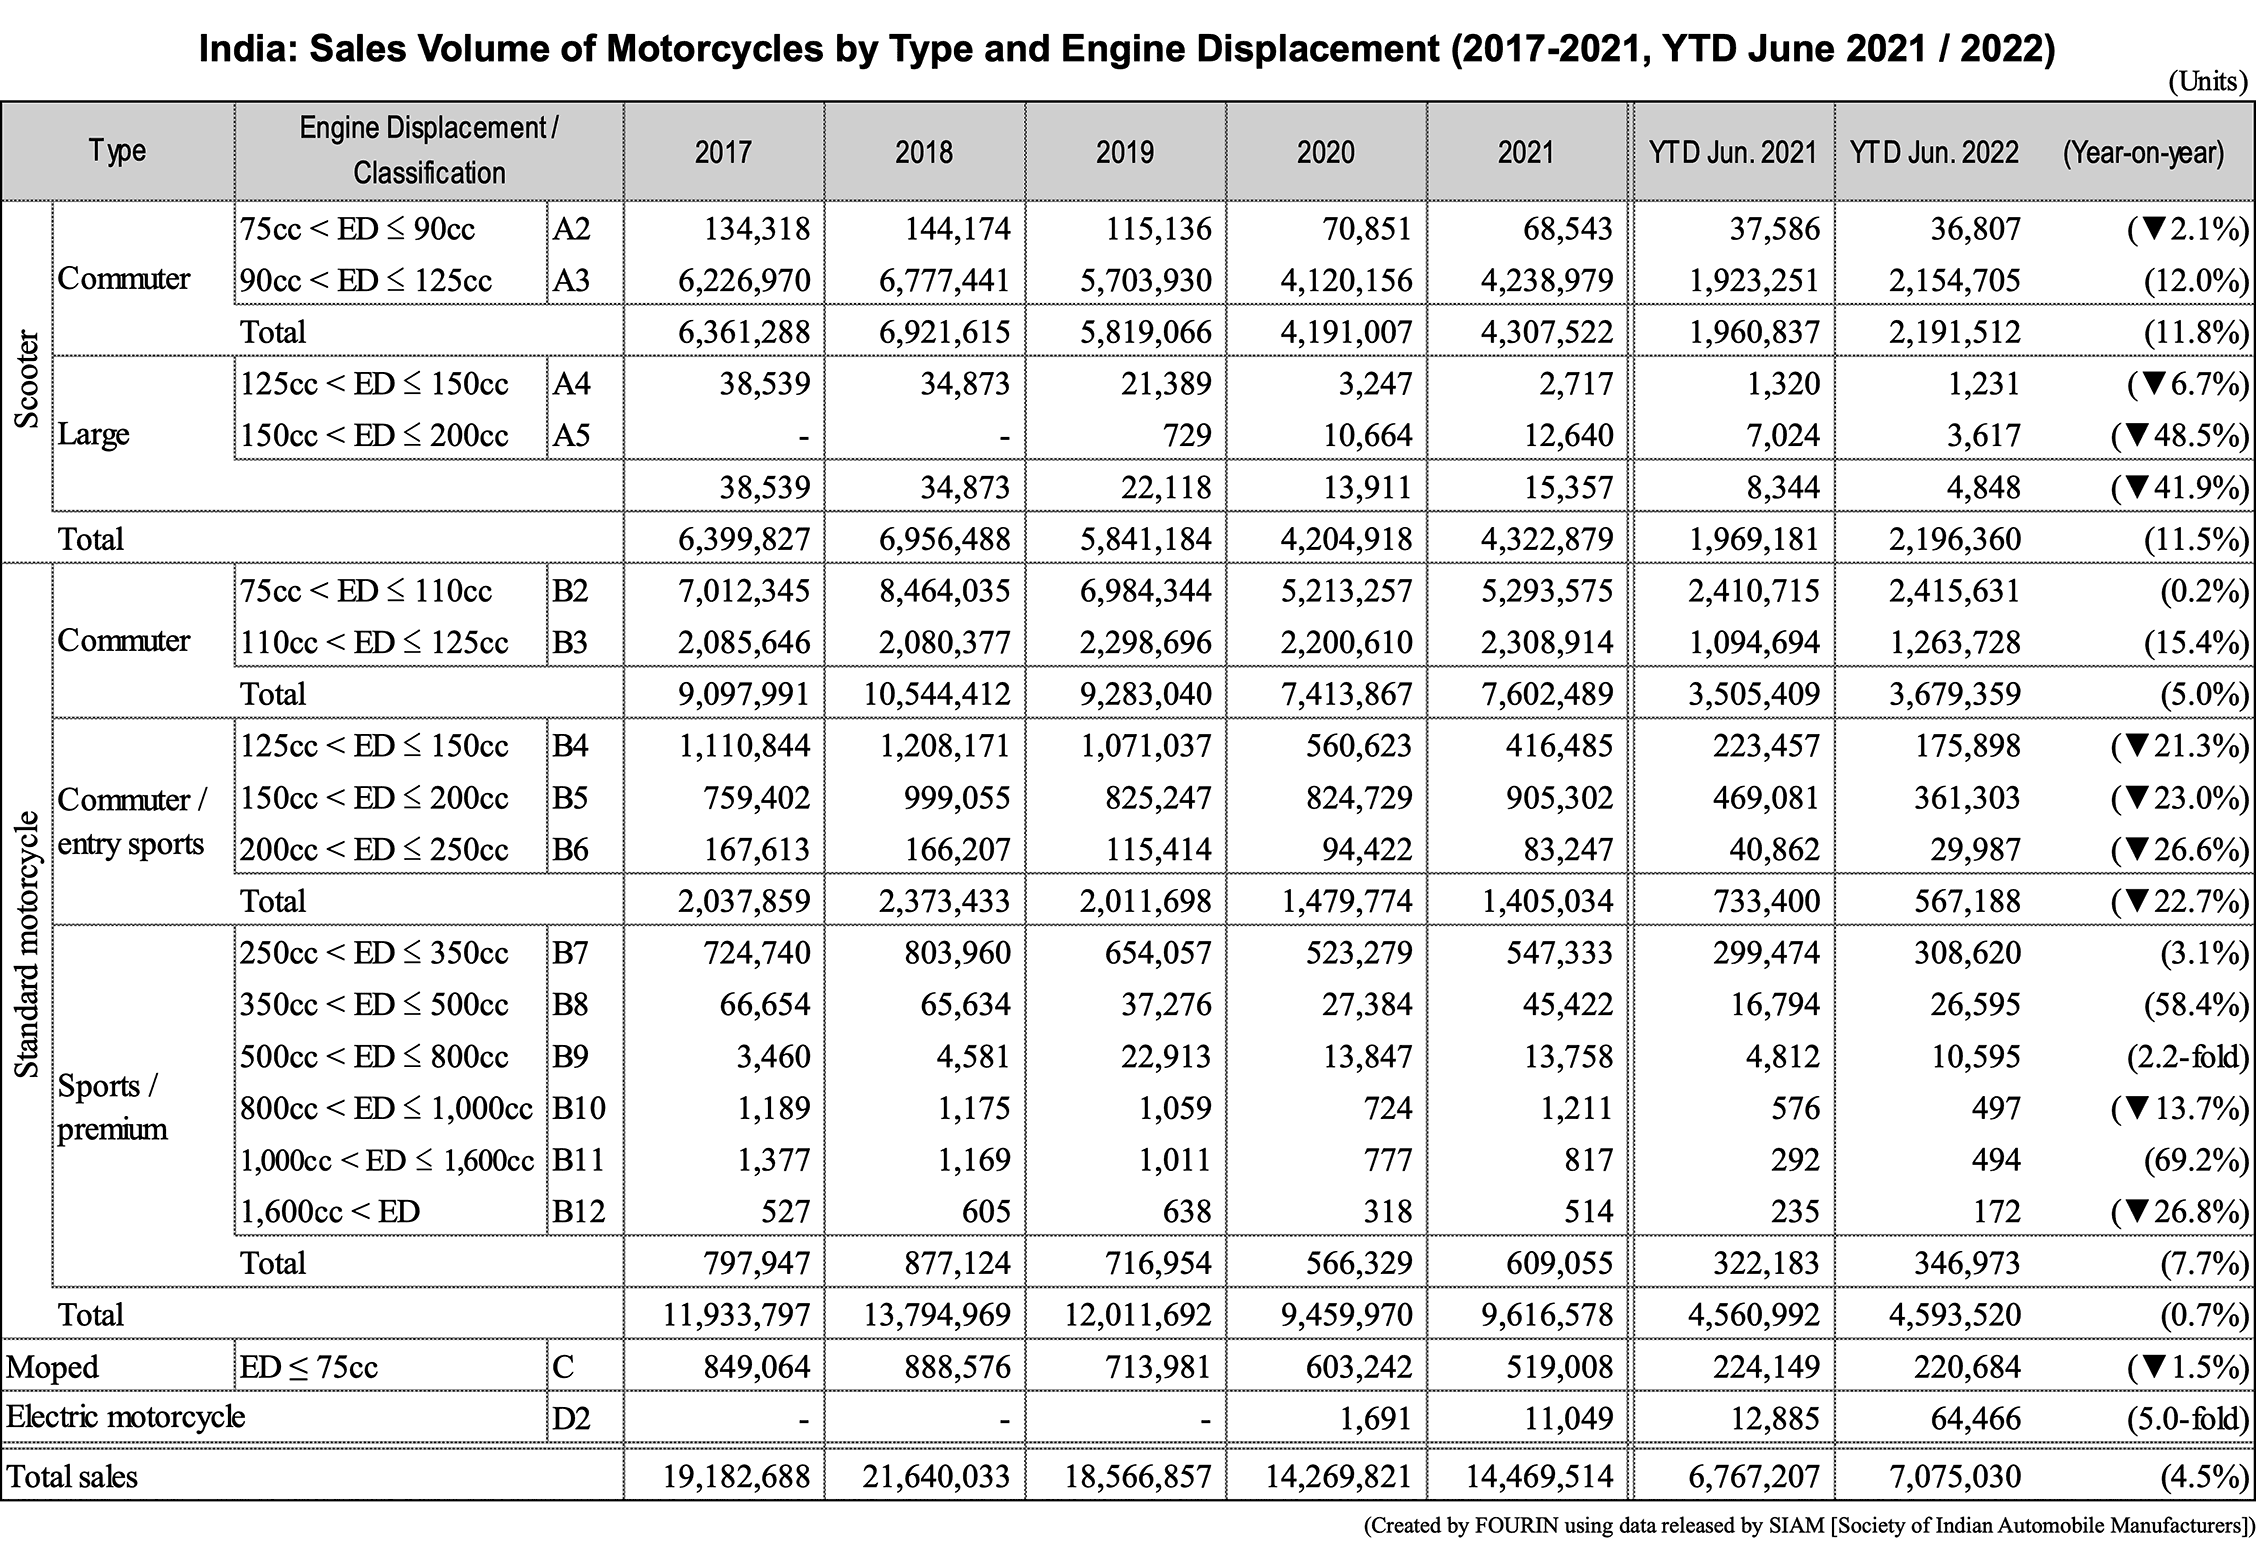 India: Sales Volume of Motorcycles by Type and Engine Displacement (2017-2021, YTD June 2021 / 2022)